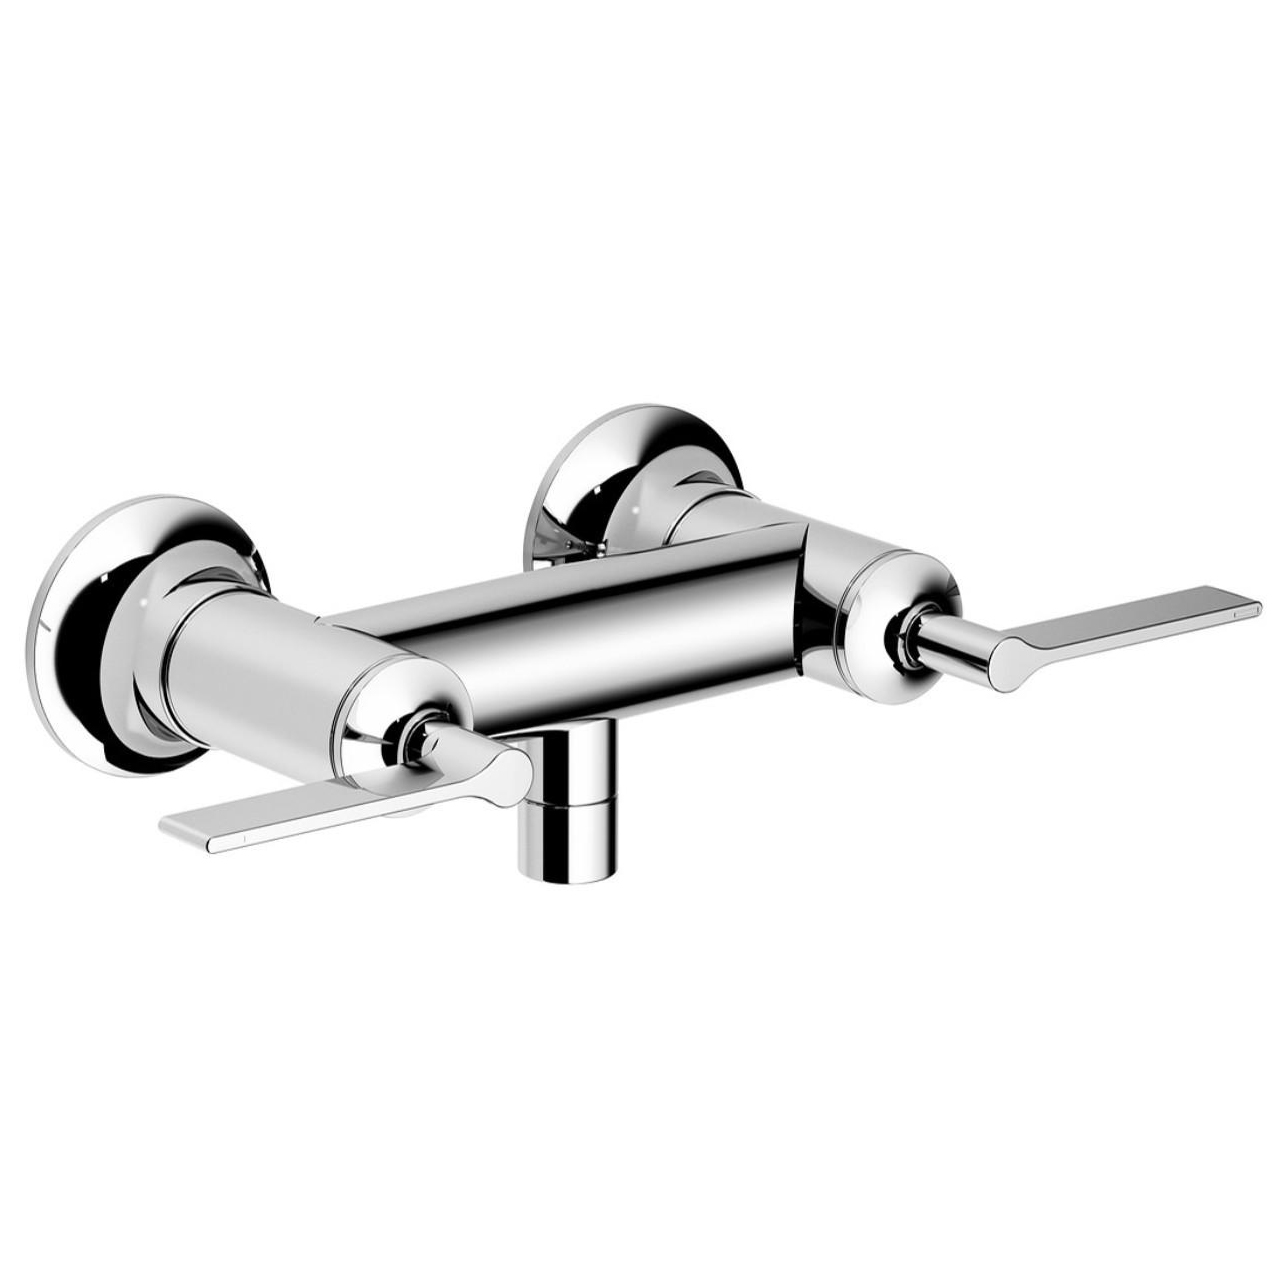 Vaia Shower Faucet Less Showerhead In Polished Chrome